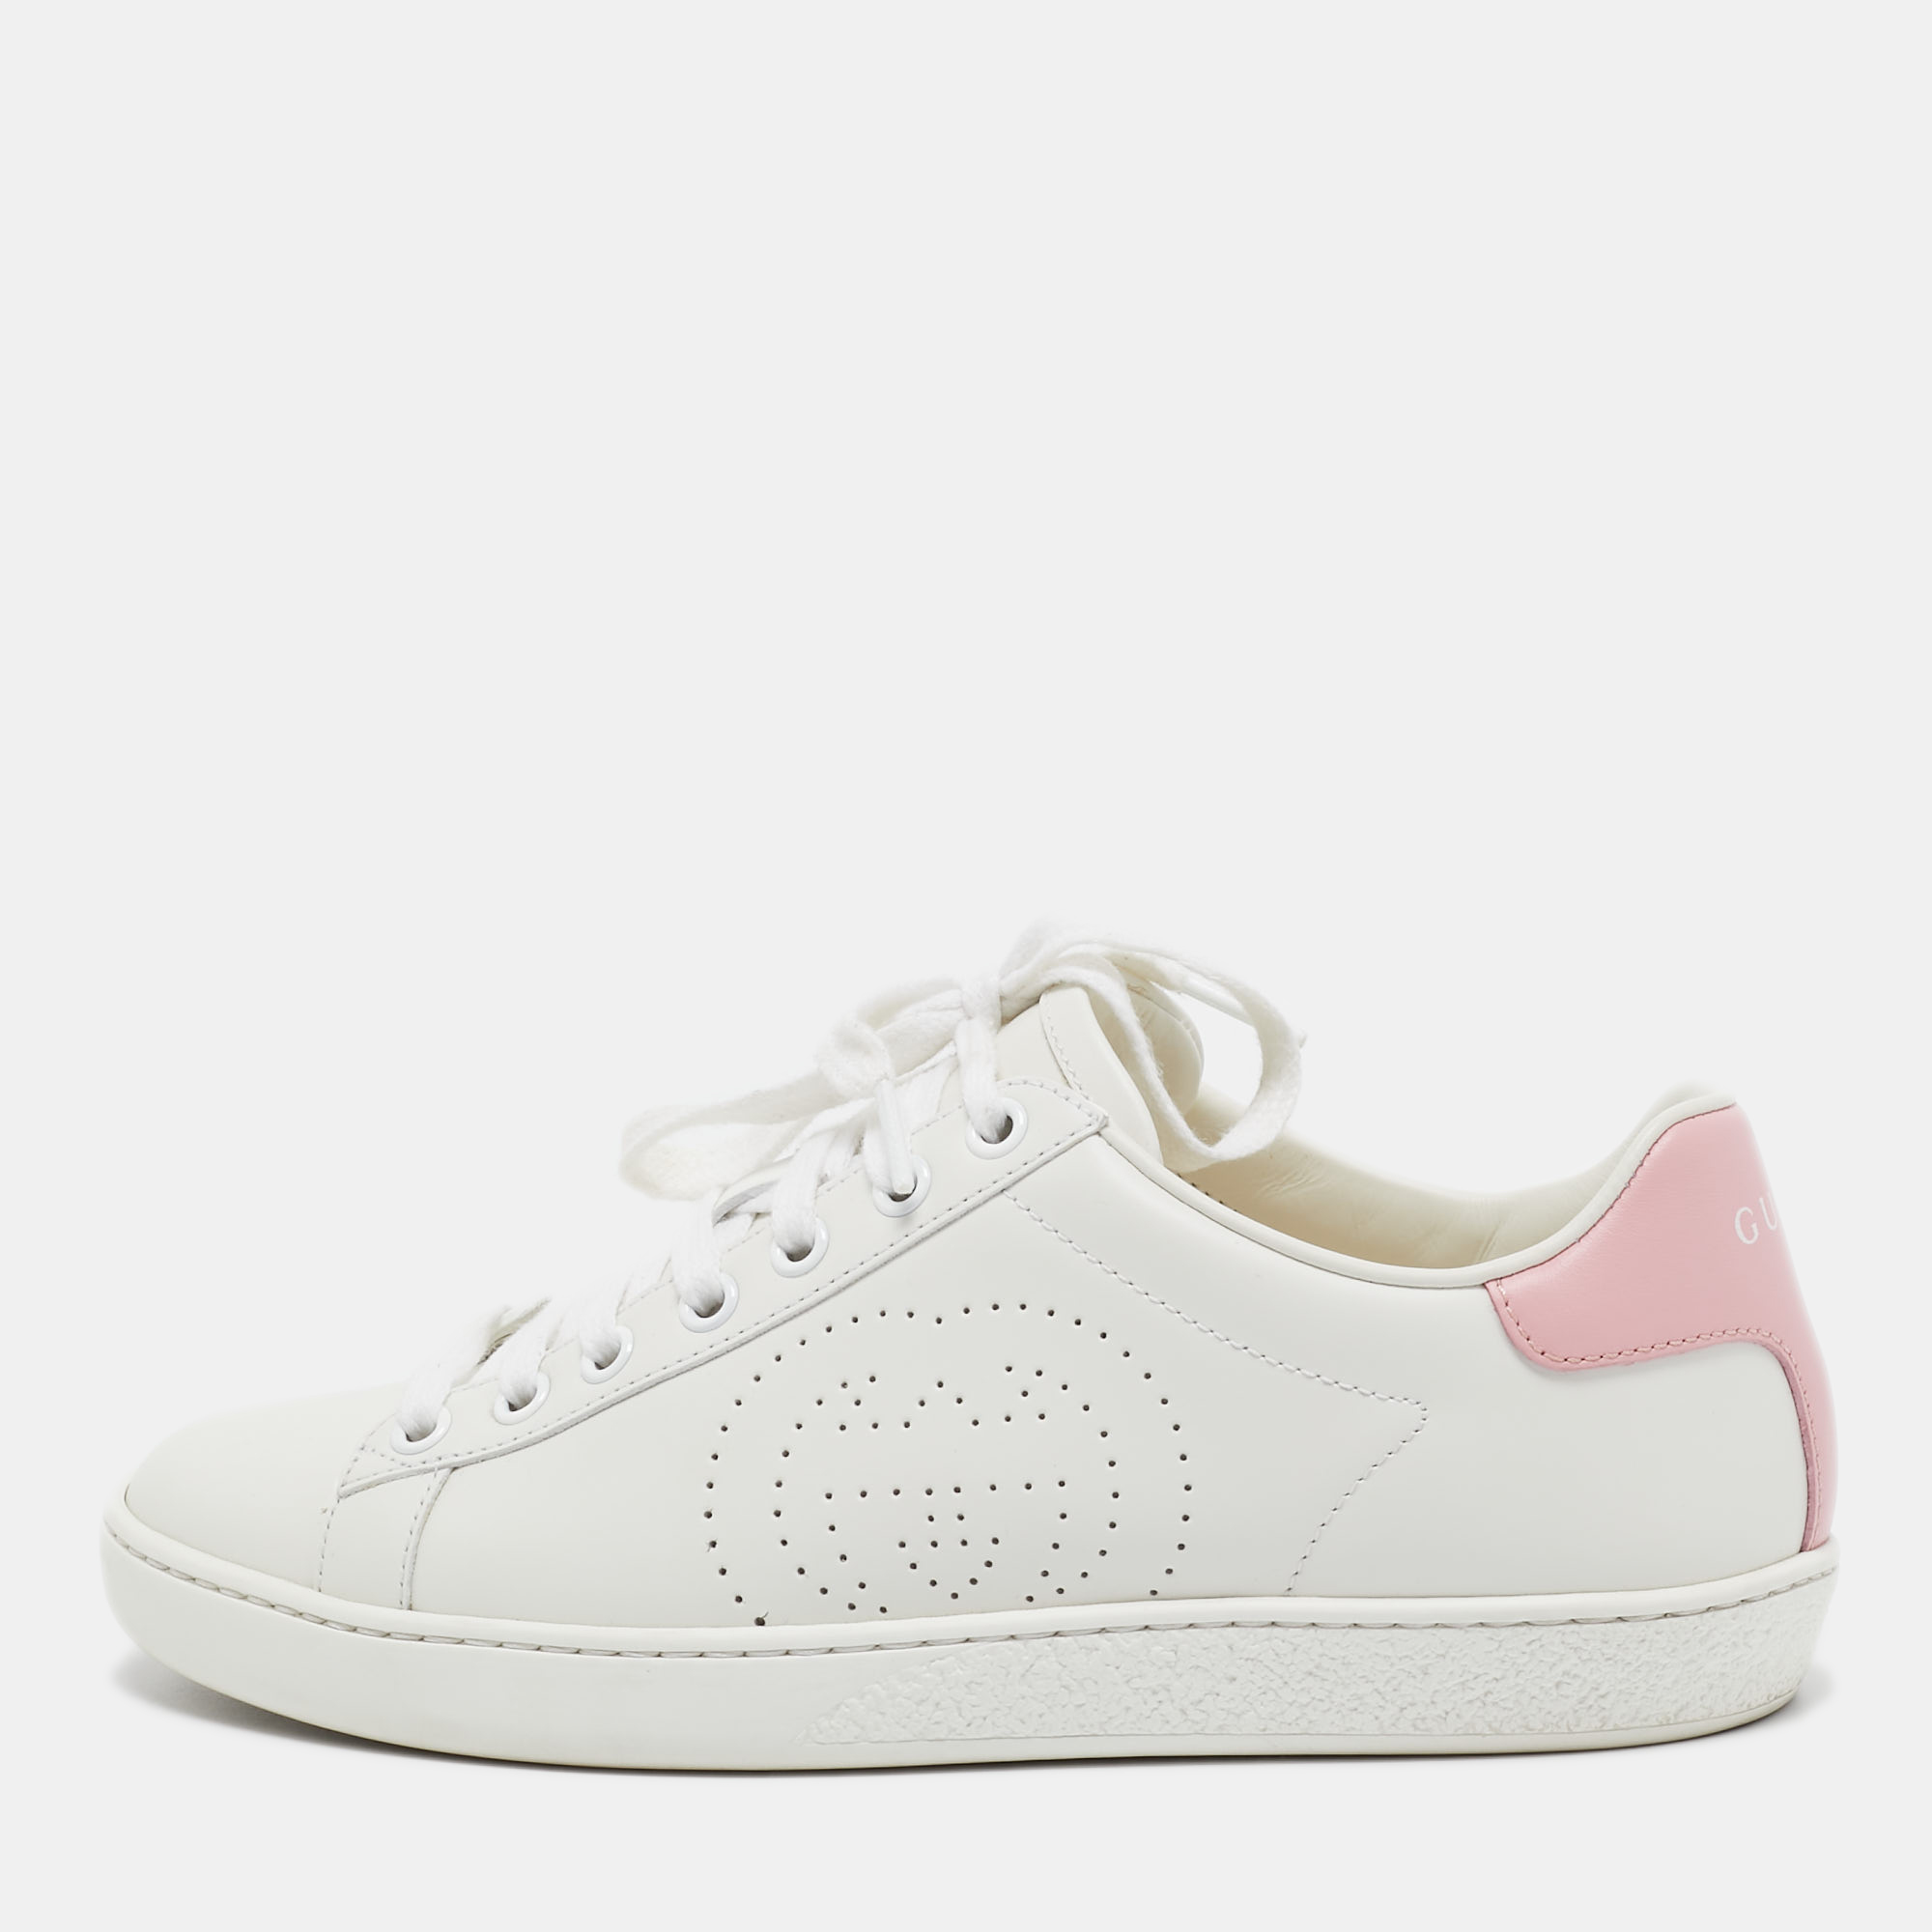 Pre-owned Gucci White Leather Ace Low Top Sneakers Size 36